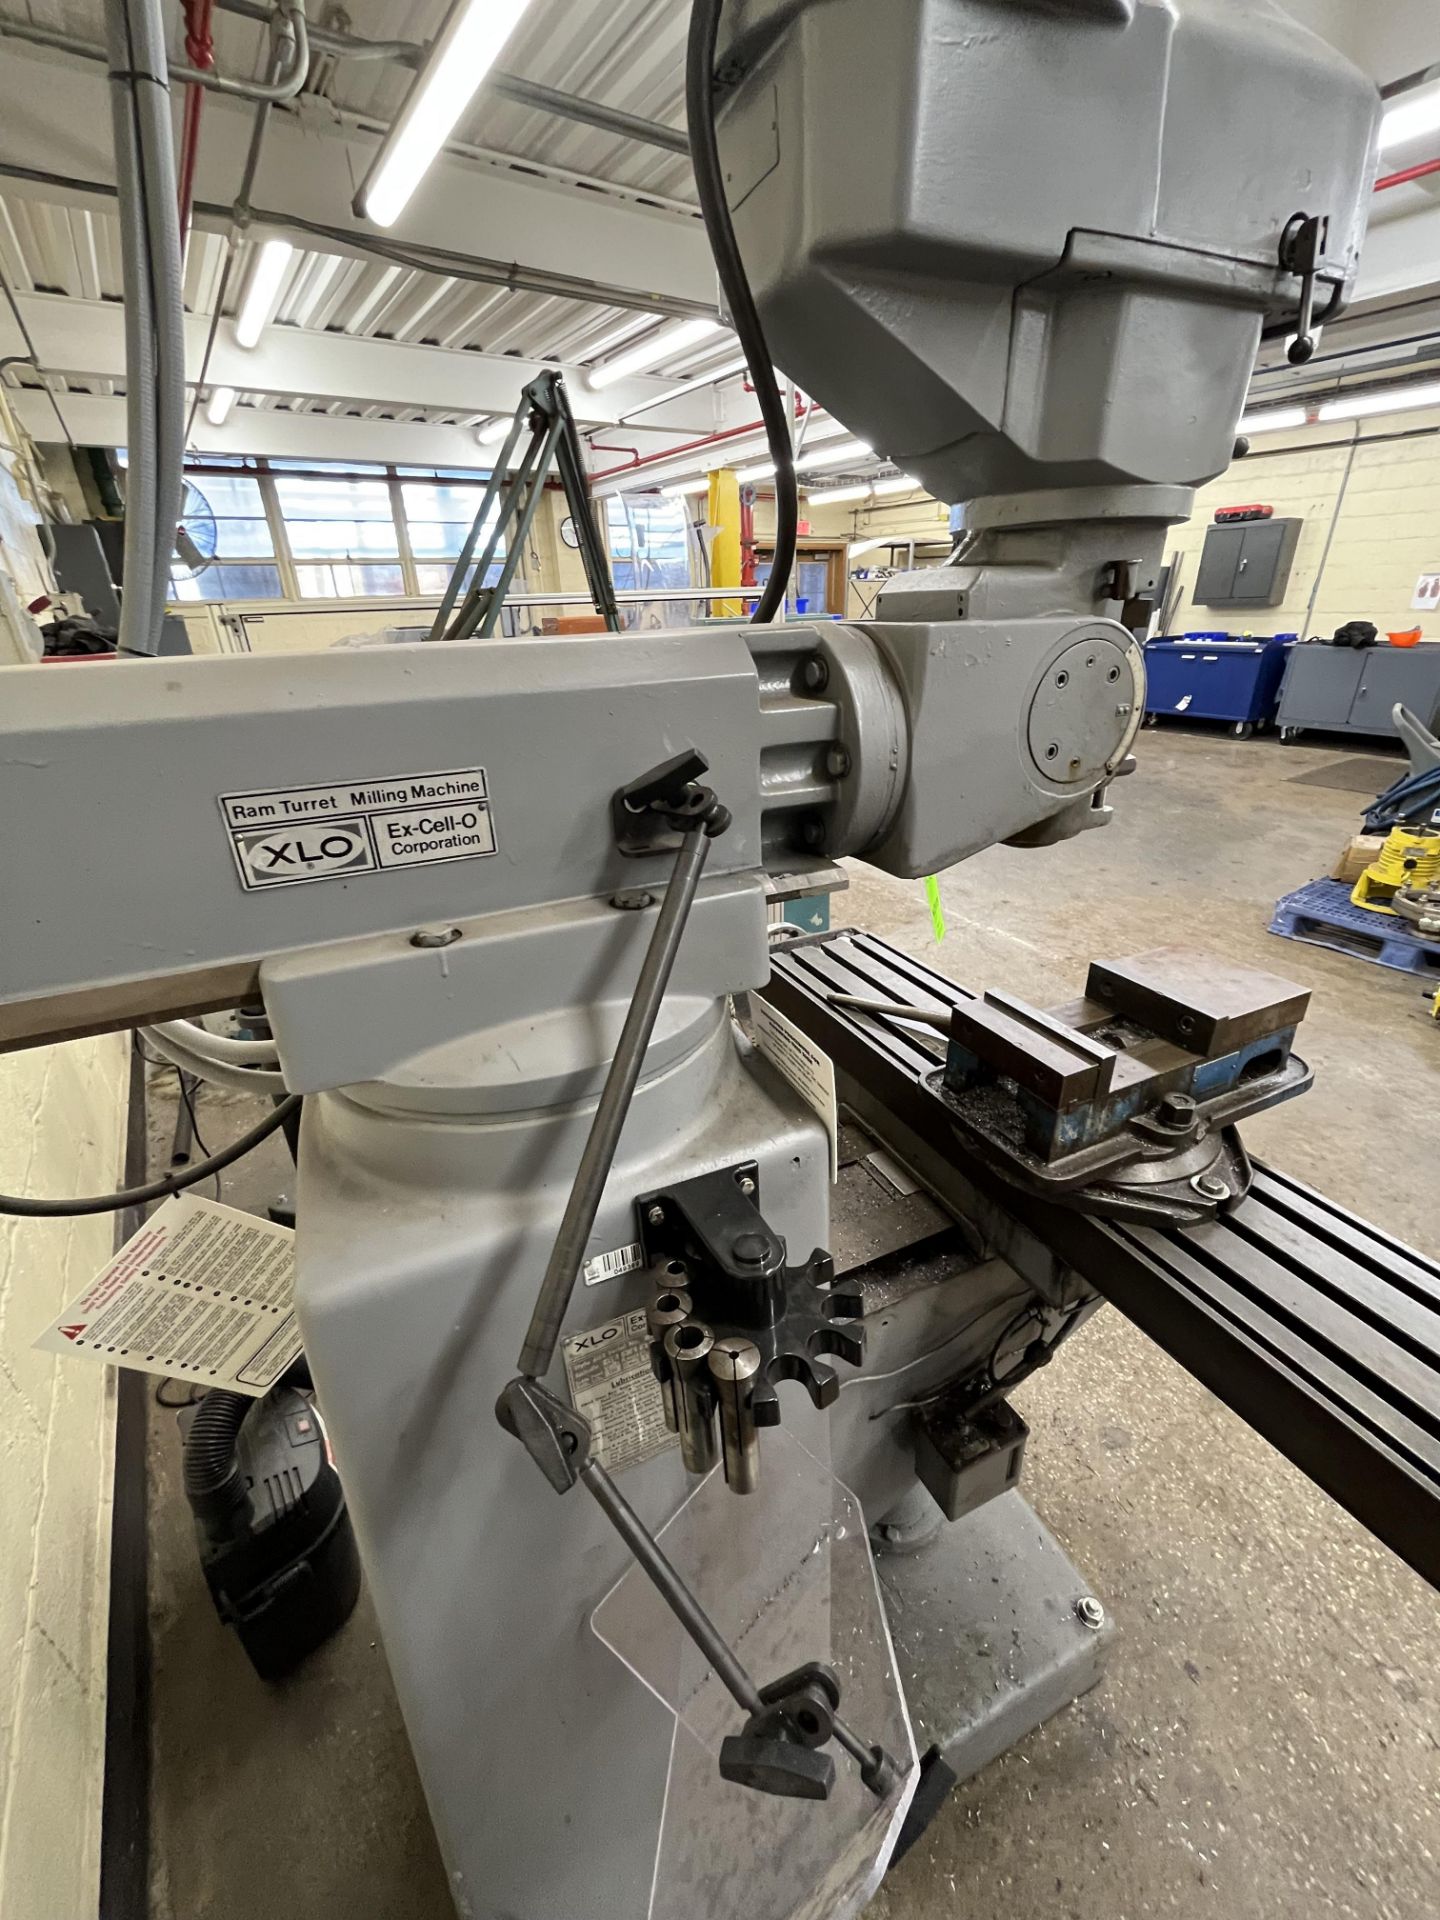 EX-CELL-O CORPORATION RAM TURRET MILLING MACHINE STYLE 602 SERIAL NO. 6026865 SPINDLE 460 VOLTS 2. - Image 5 of 8